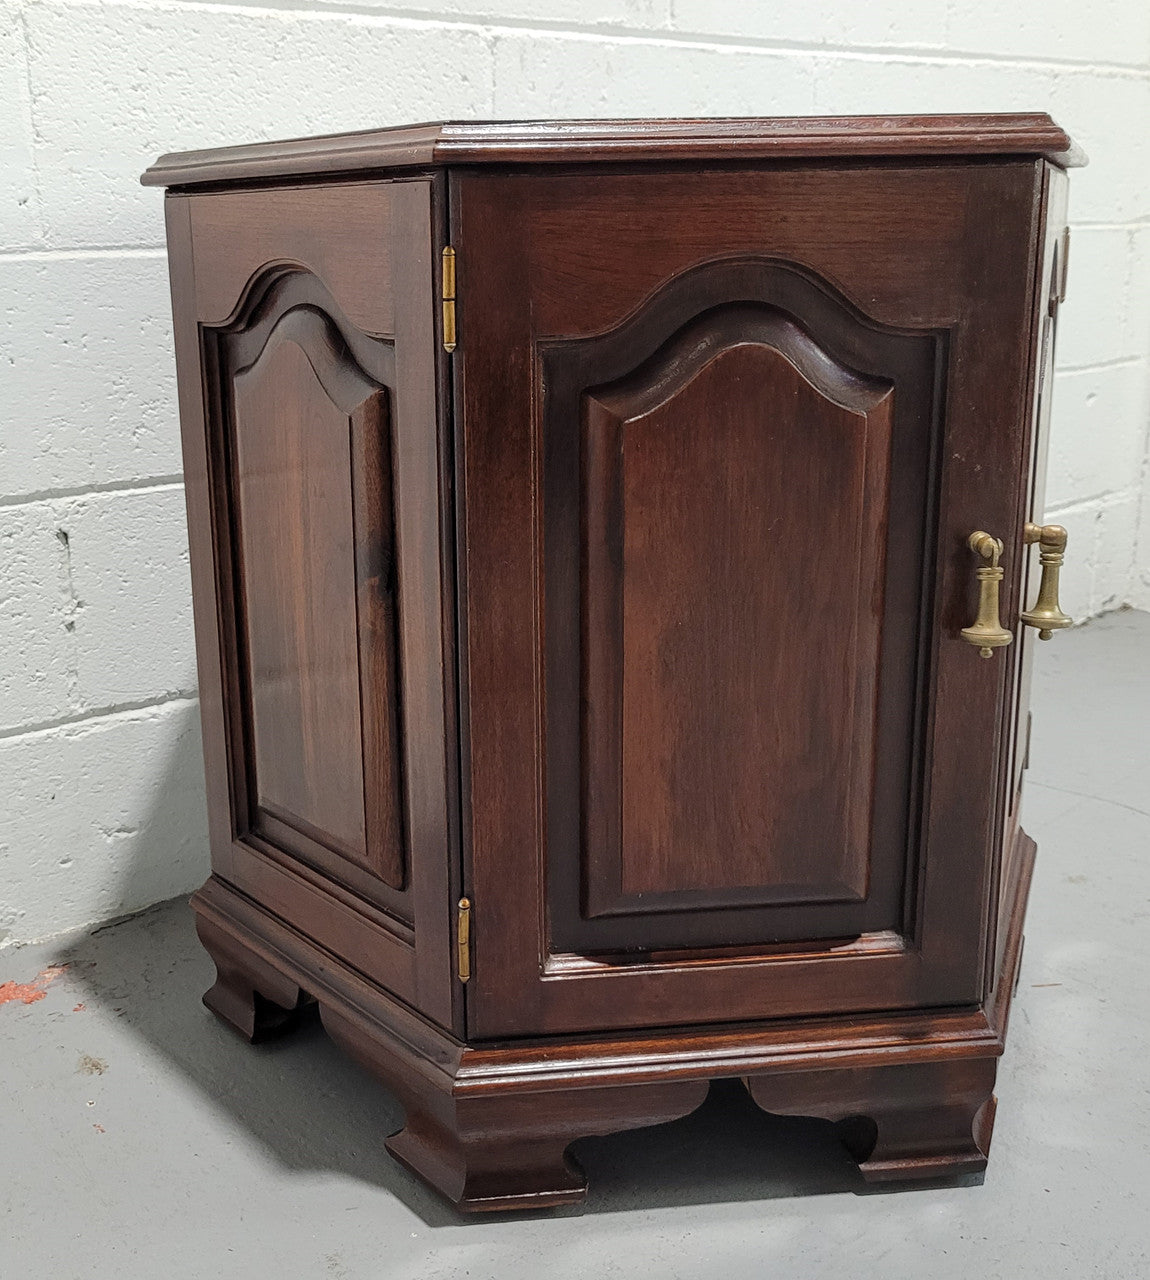 Hexagonal Mahogany enclosed side cabinet with two doors. Would make an ideal side cabinet and is in good restored condition.